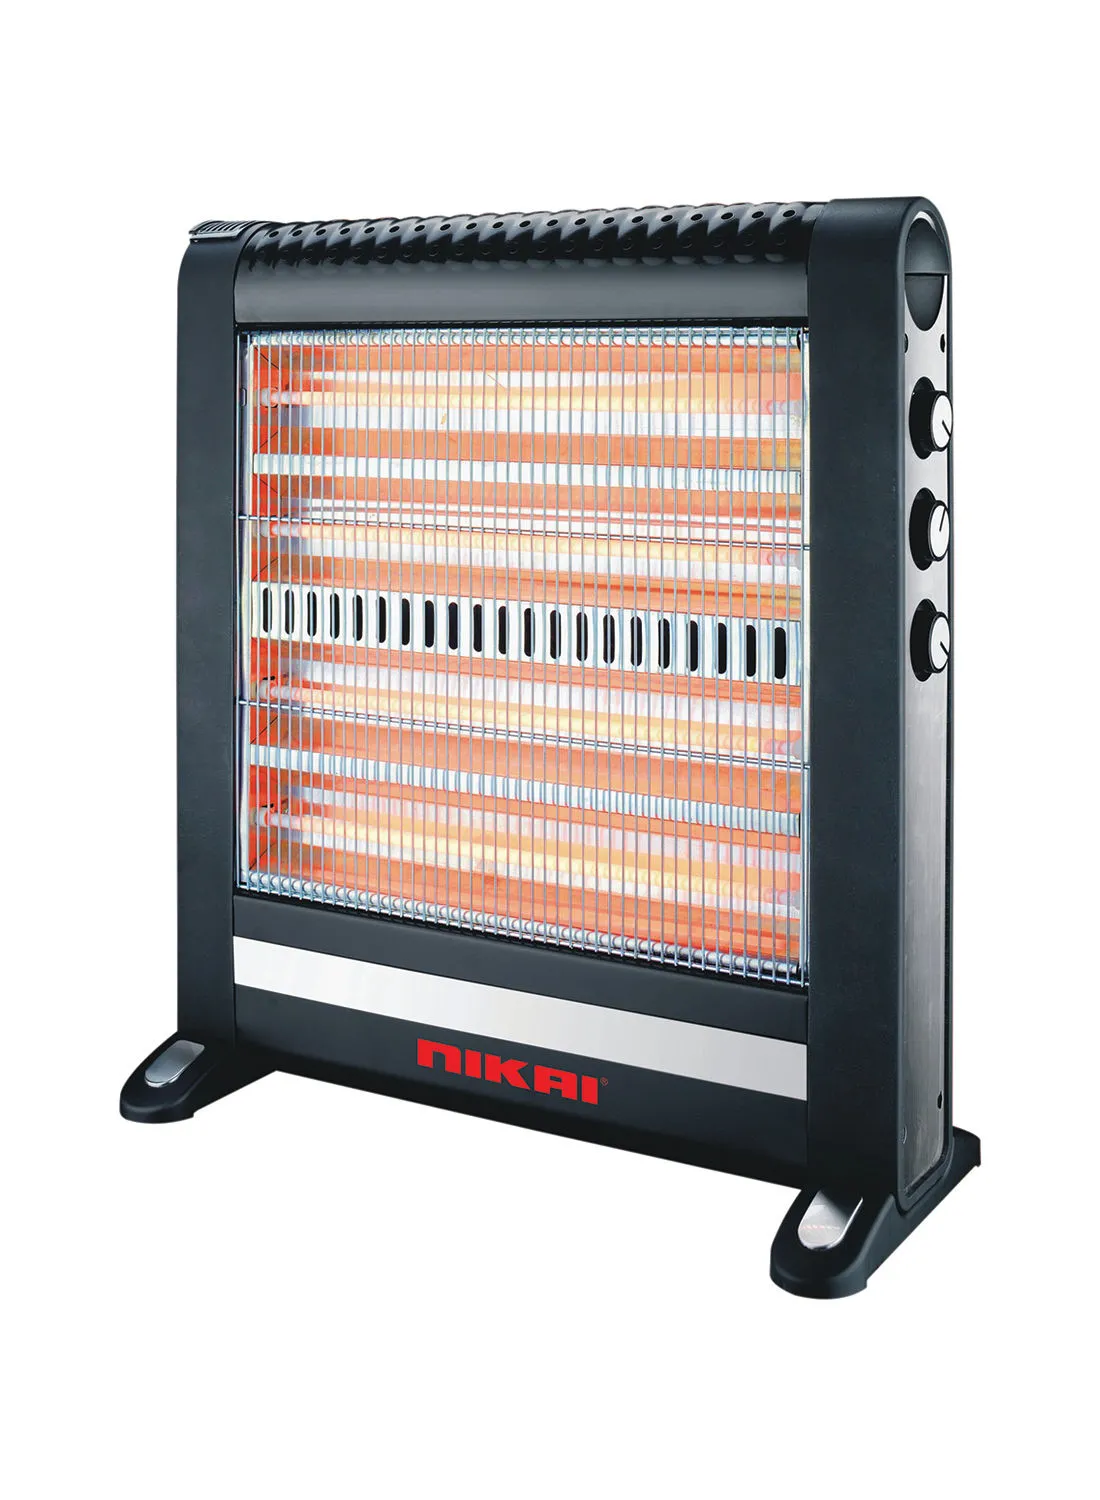 NIKAI Electric Heater, 4 Quartz Heating Elements, Tip-Over Safety Switch, Easy To Handle 2400 W NQH300FH Black